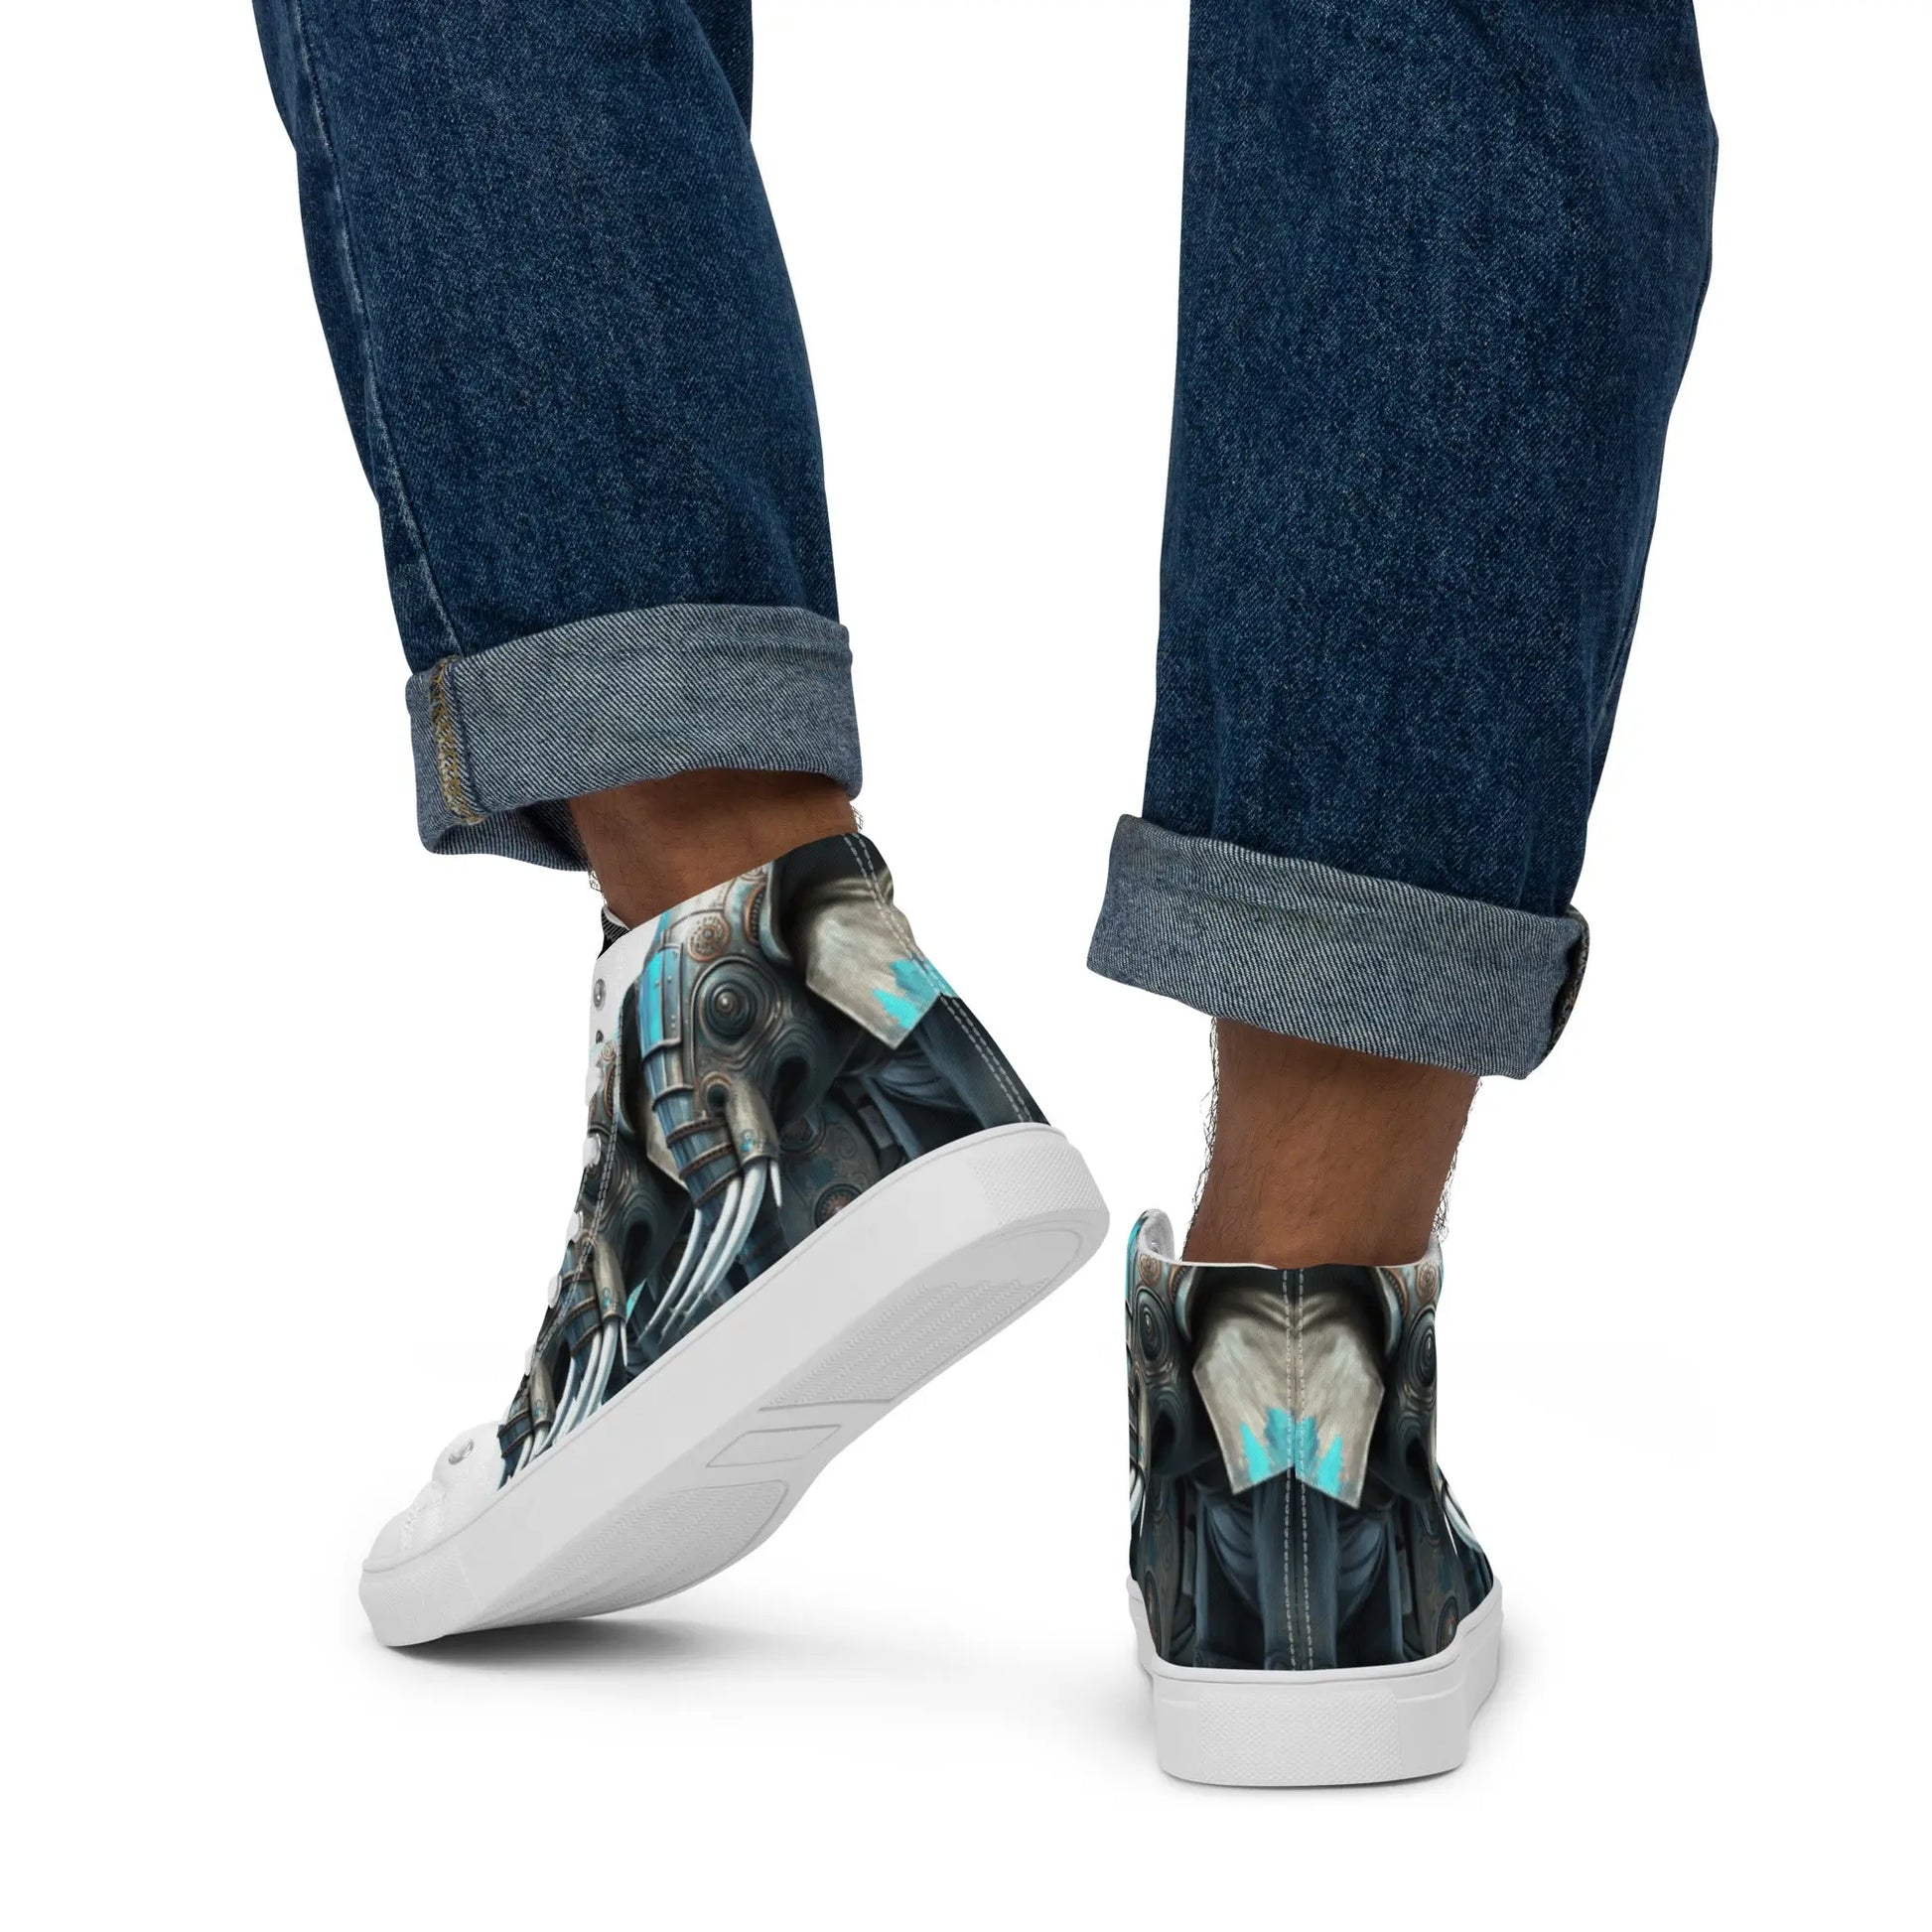 Metallic Elephant High Top Sneakers: AI-Engineered, Unisex, Perfect Blend of Fashion & Function with Durable, Comfortable, Animal Print Footwear Kinetic Footwear